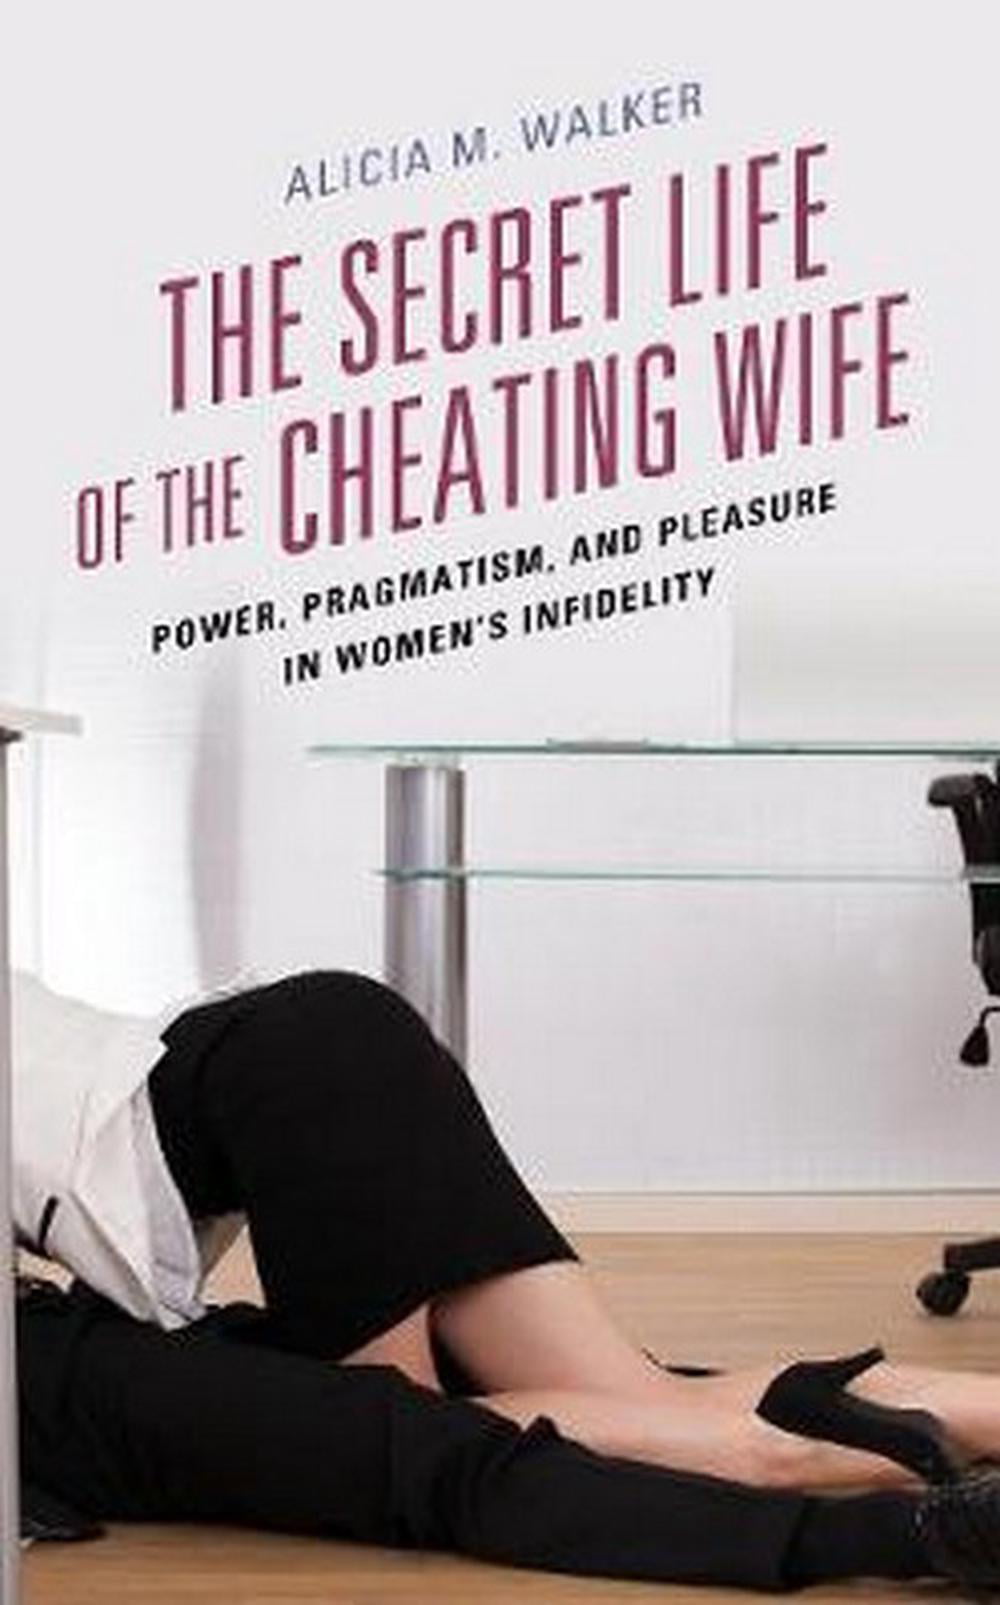 The Secret Life Of The Cheating Wife Power Pragmatism And Pleasure In Womens Infidelity